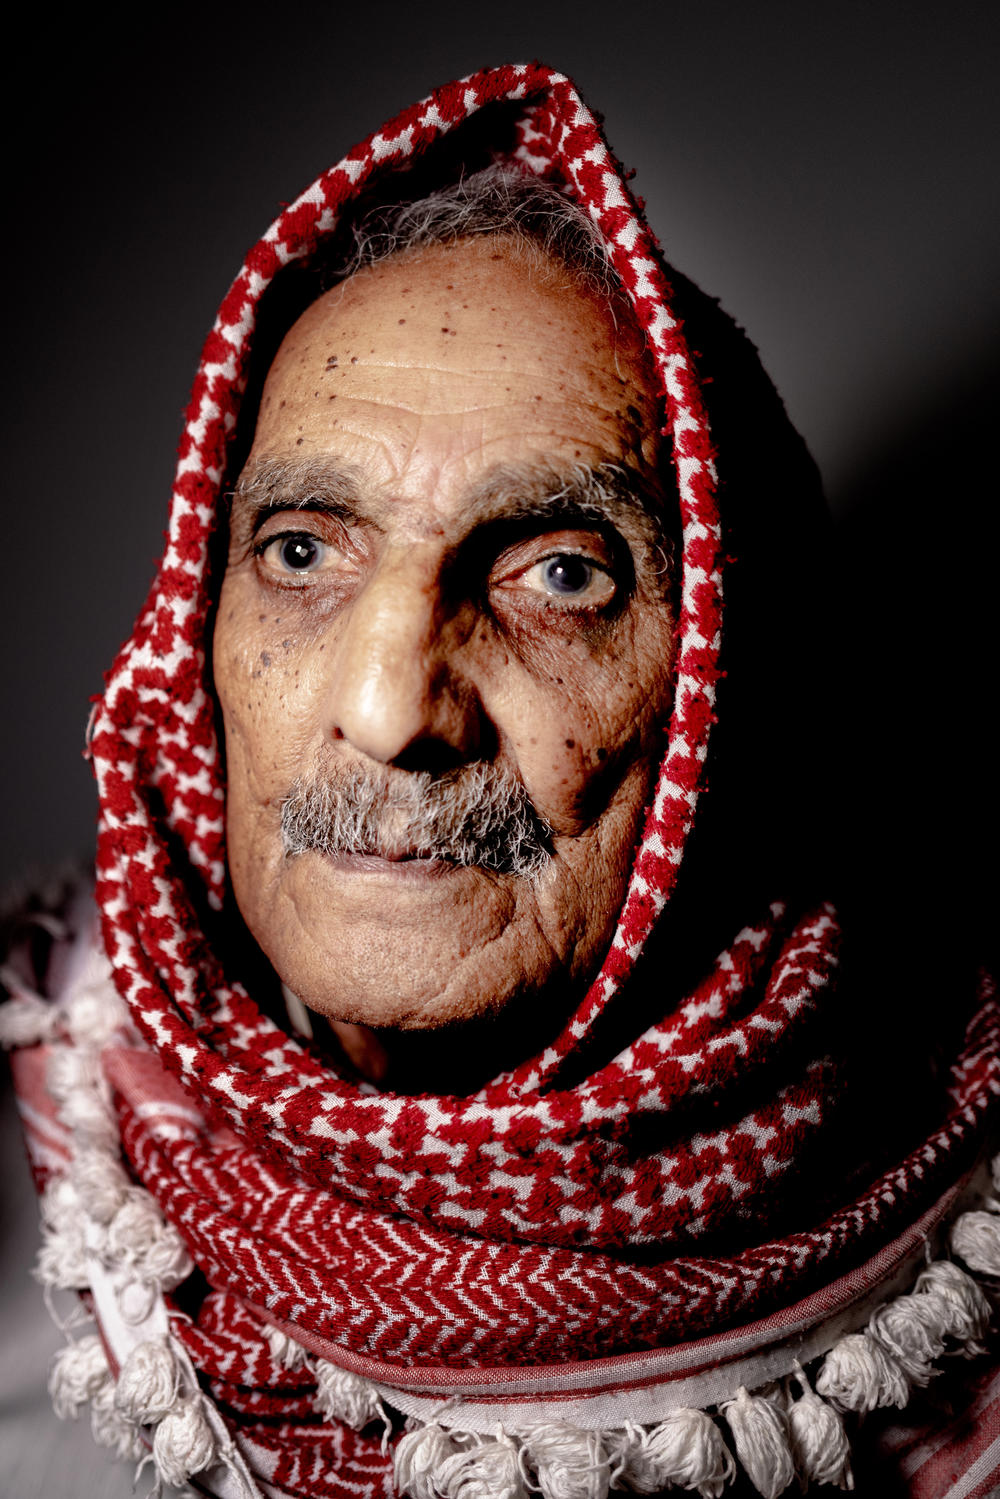 84-year-old Mohammed Suleiman Khader lived through what Palestinians call the Nakba — the catastrophe — of 1948. That year, his family fled their village near what is now Tel Aviv, and came to Al-Am'ari refugee camp in Ramallah, where they've lived ever since. 